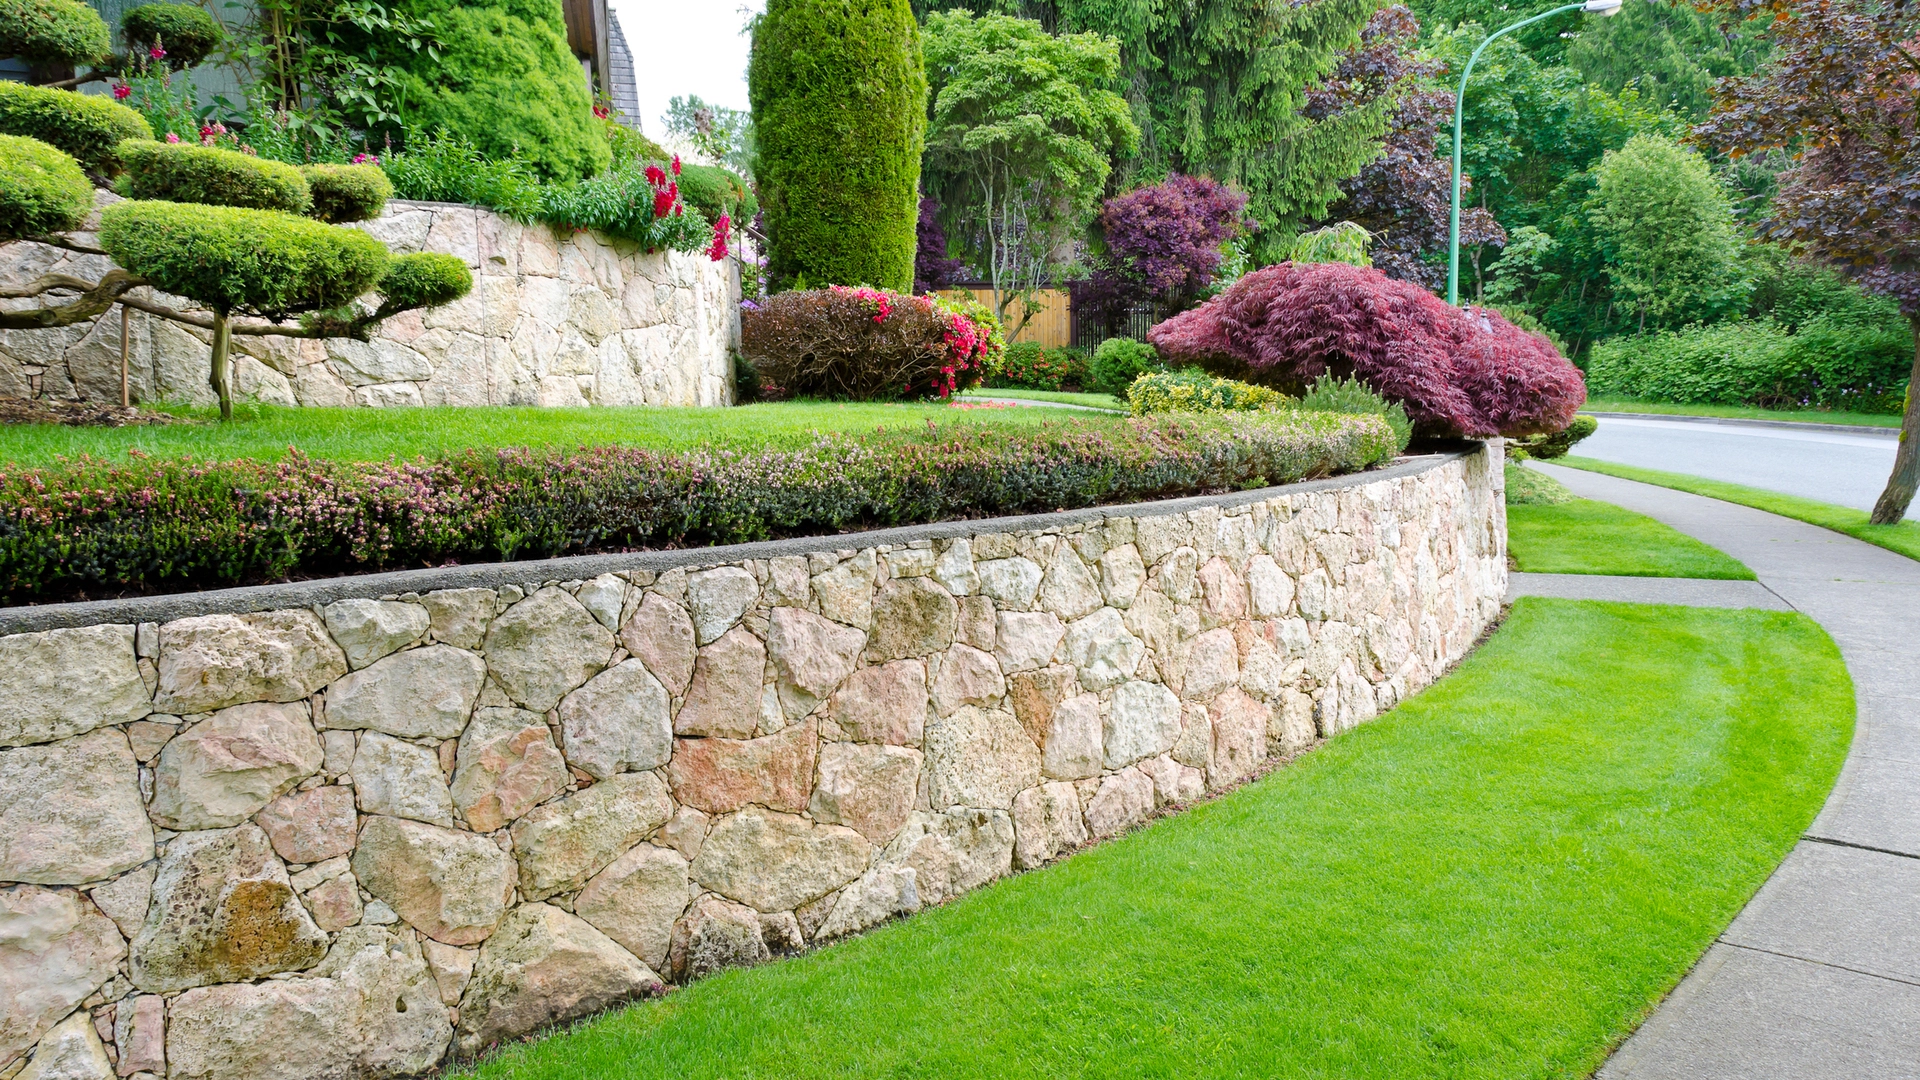 Is Your Property on a Slope? It's Time To Install a Retaining Wall